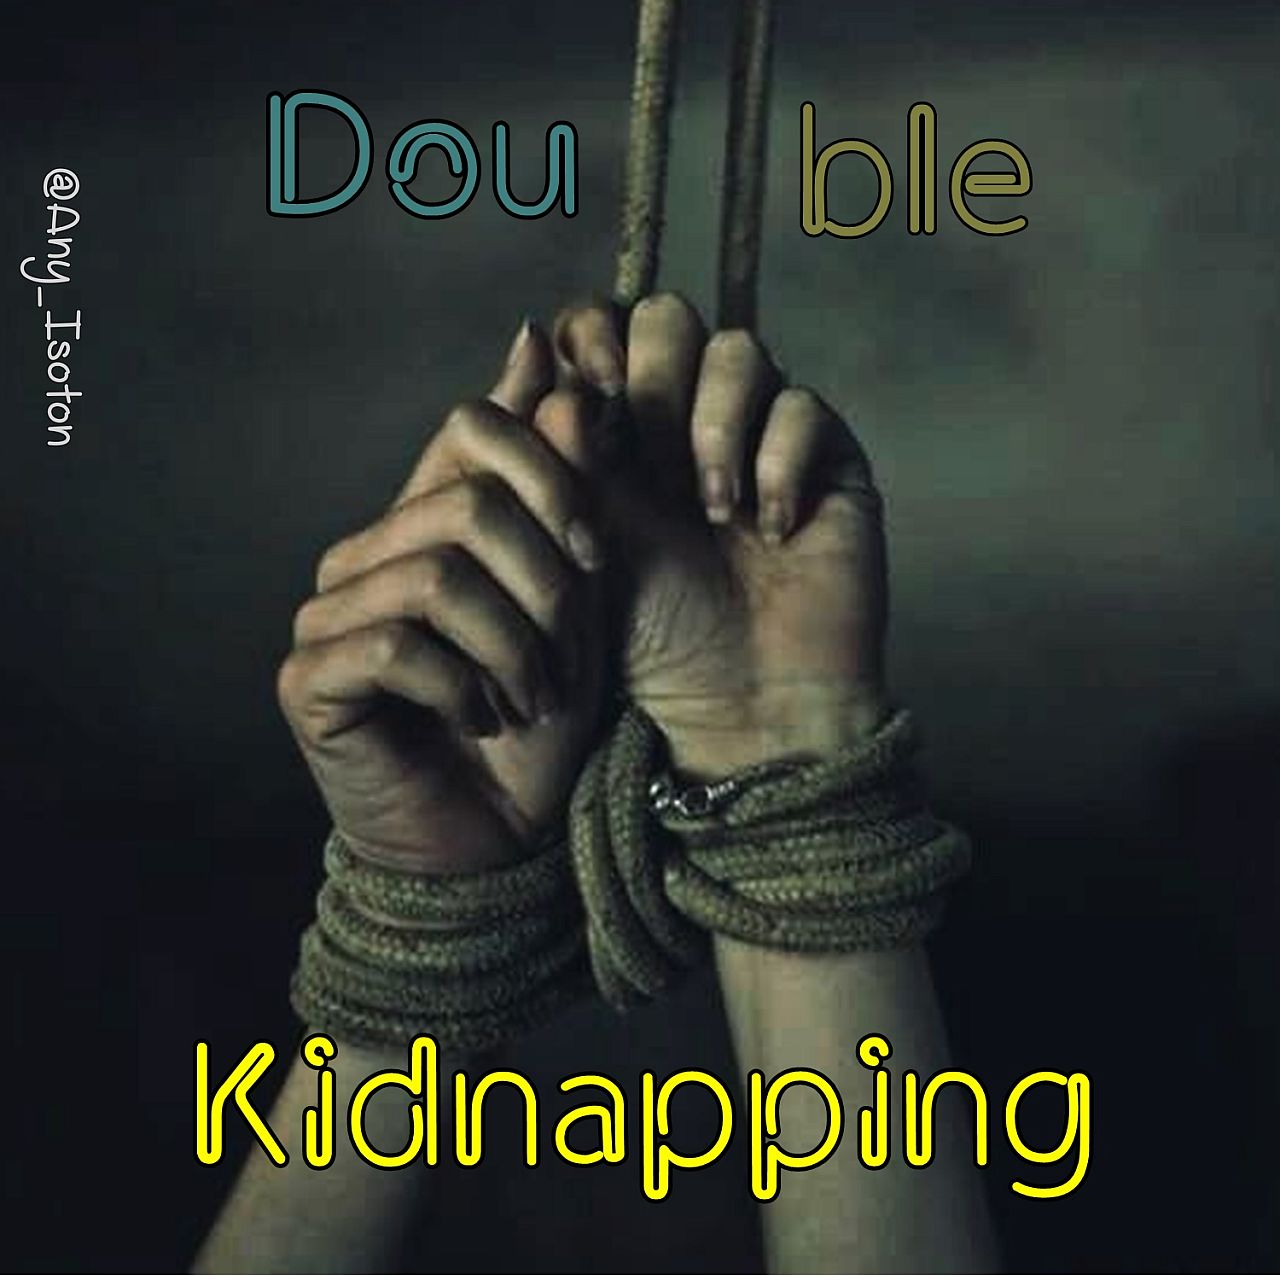 Double Kidnapping.